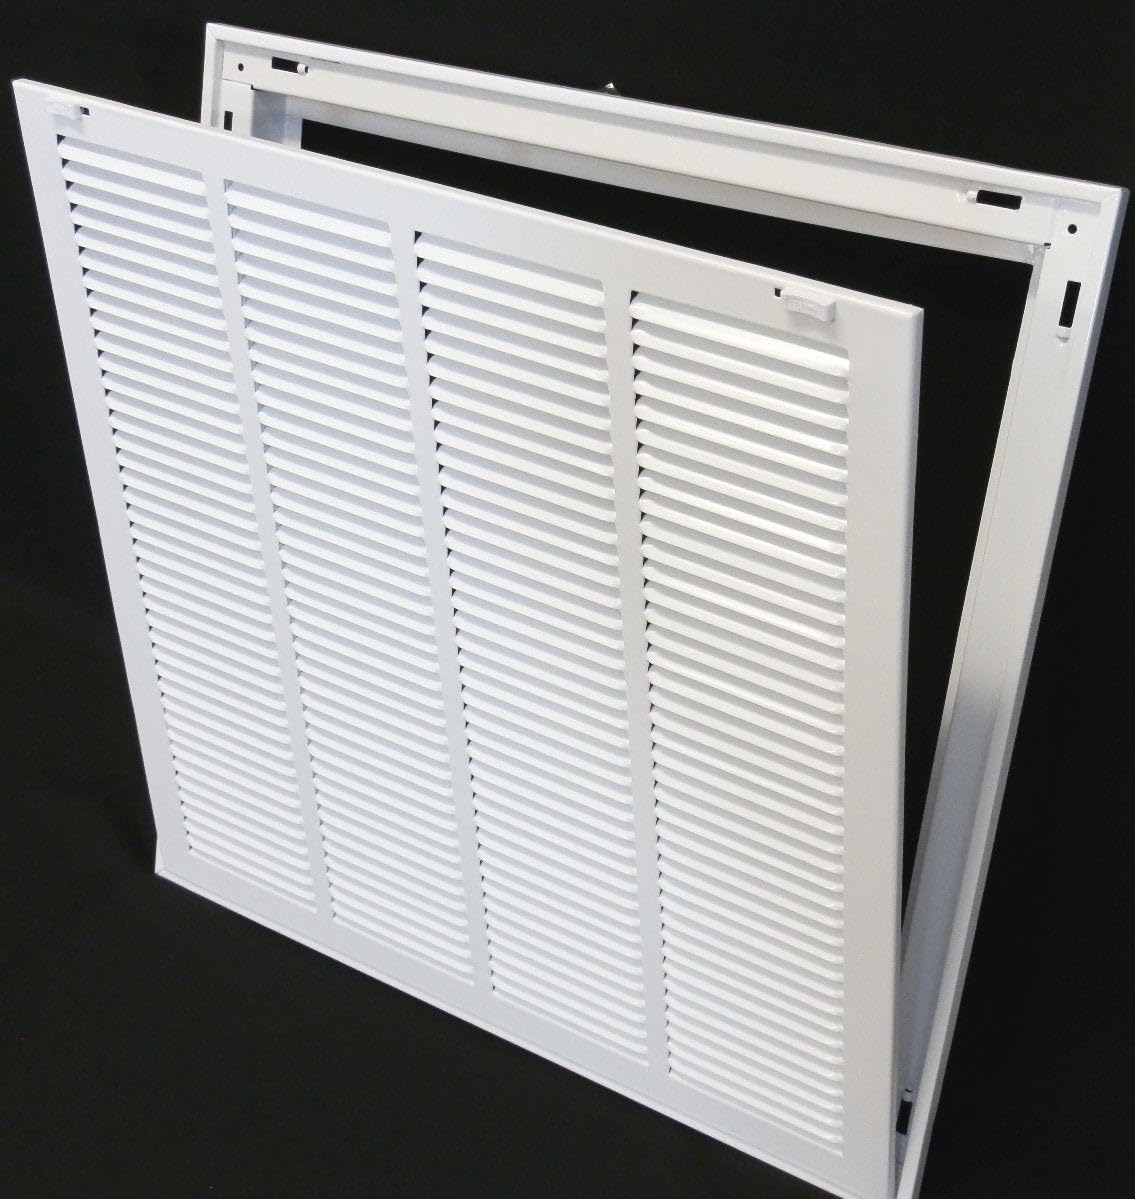 24&quot; X 24&quot; Steel Return Air Filter Grille for 1&quot; Filter - Removable Frame - * Filter Included * [Outer Dimensions: 26 5/8&quot; X 26 5/8&quot;]